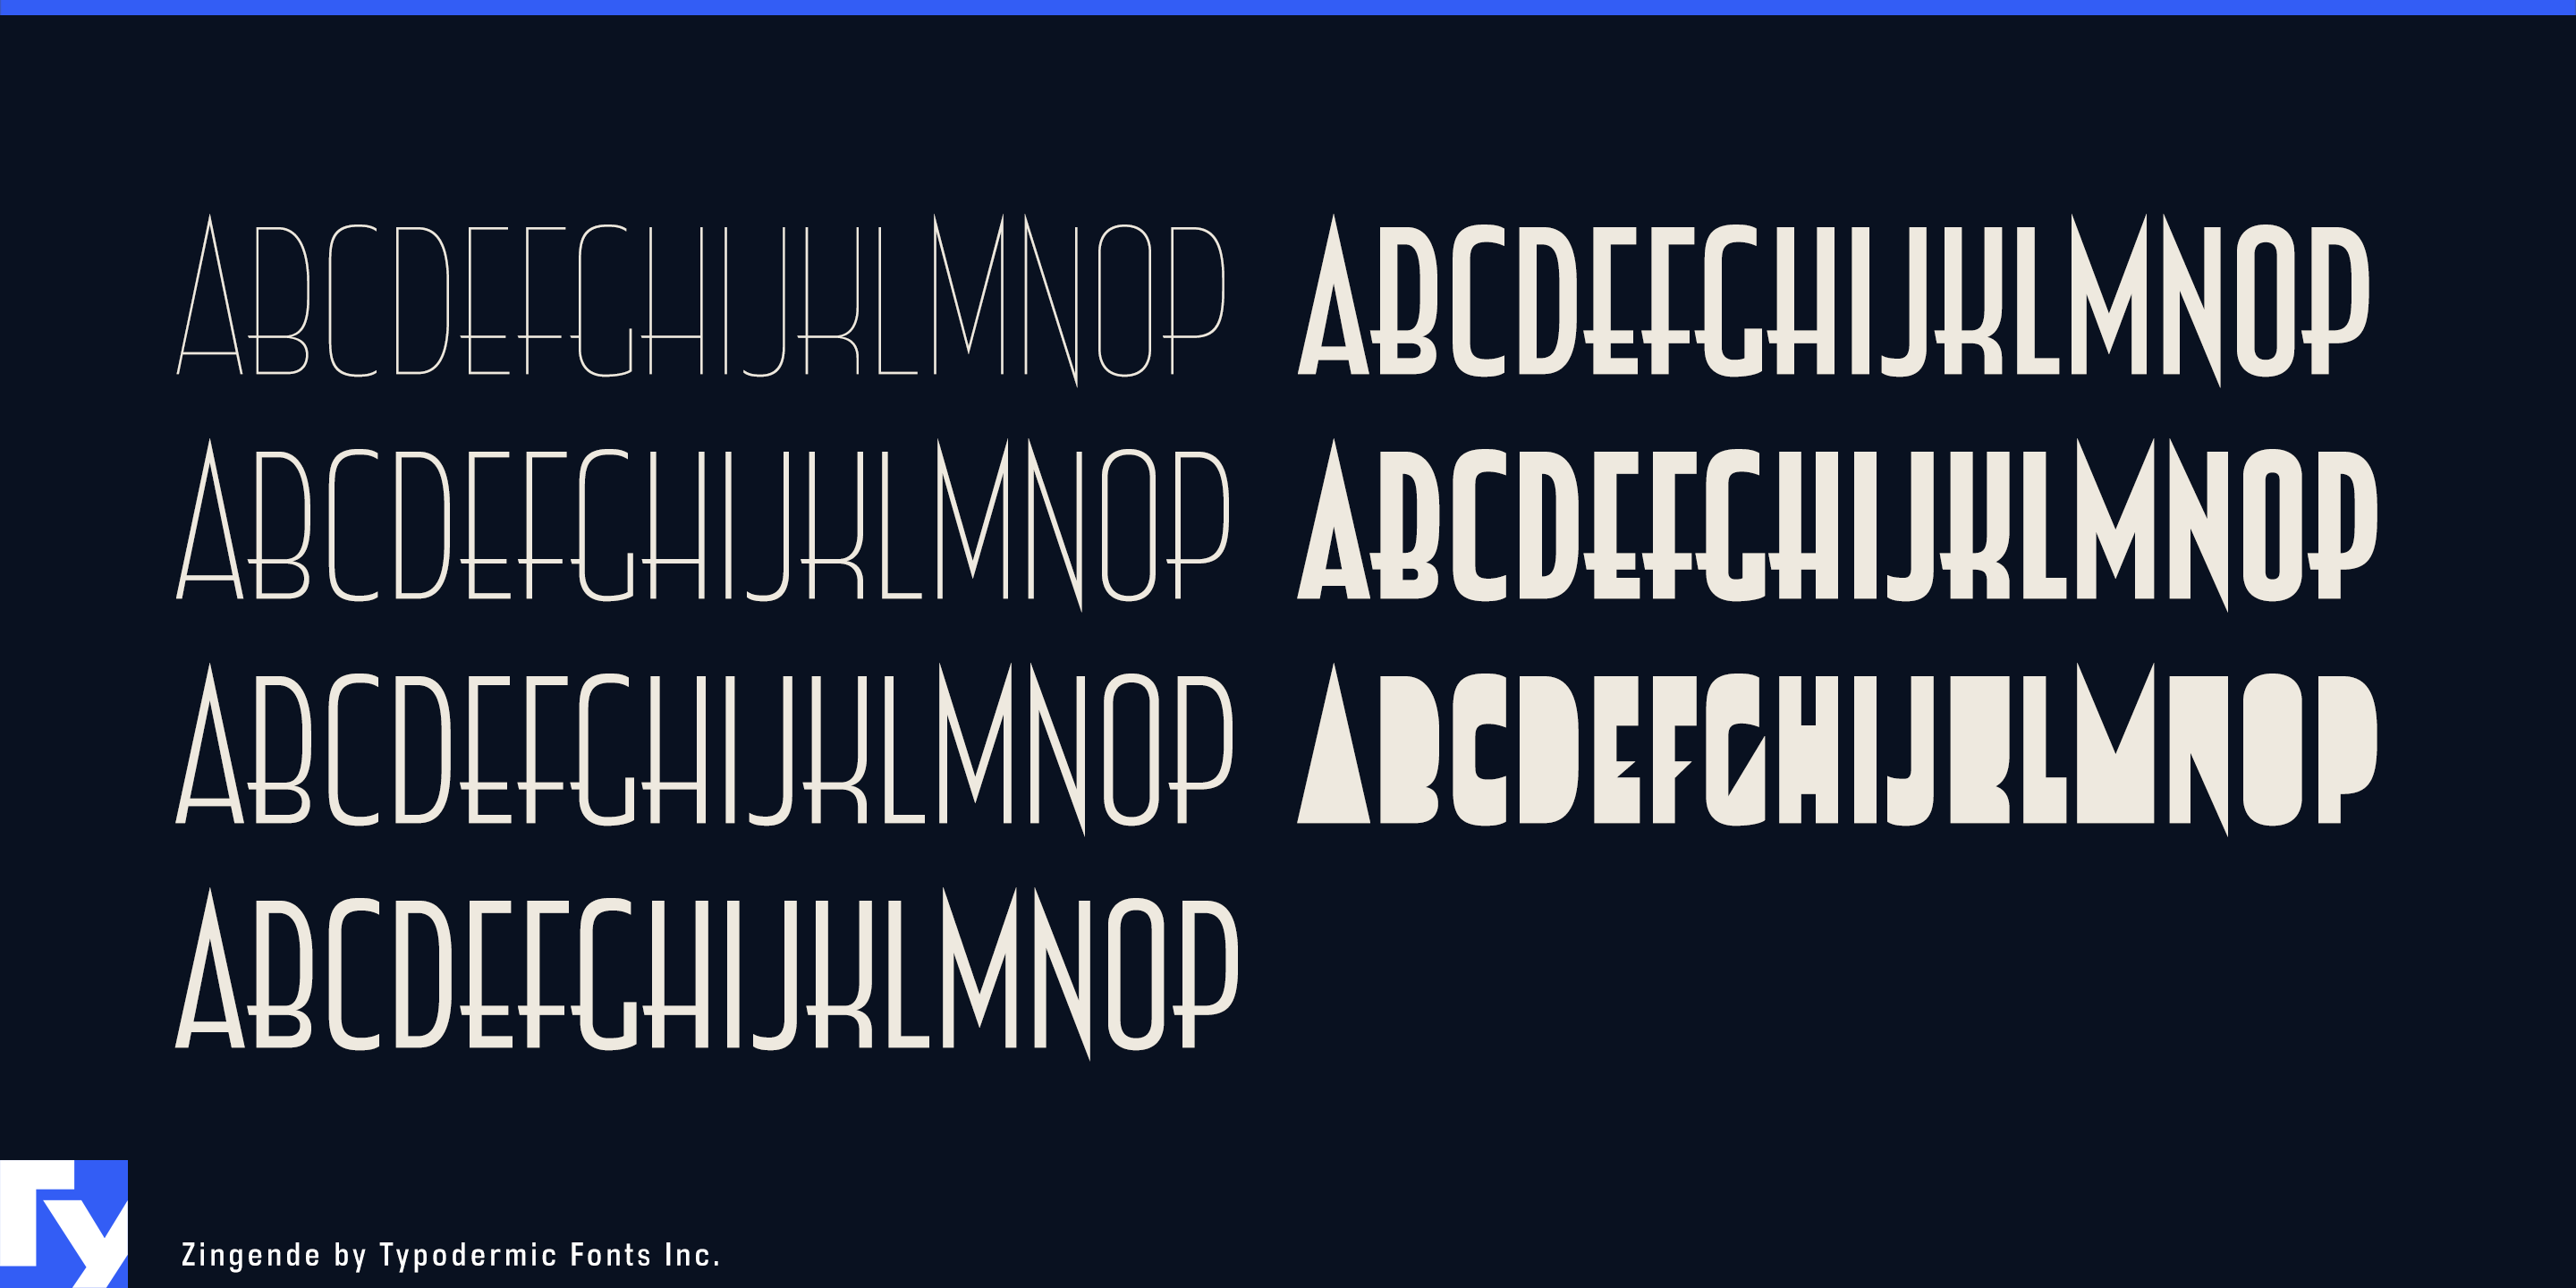 Class and Sophistication Combined: Zingende Typeface Elevates Your Message